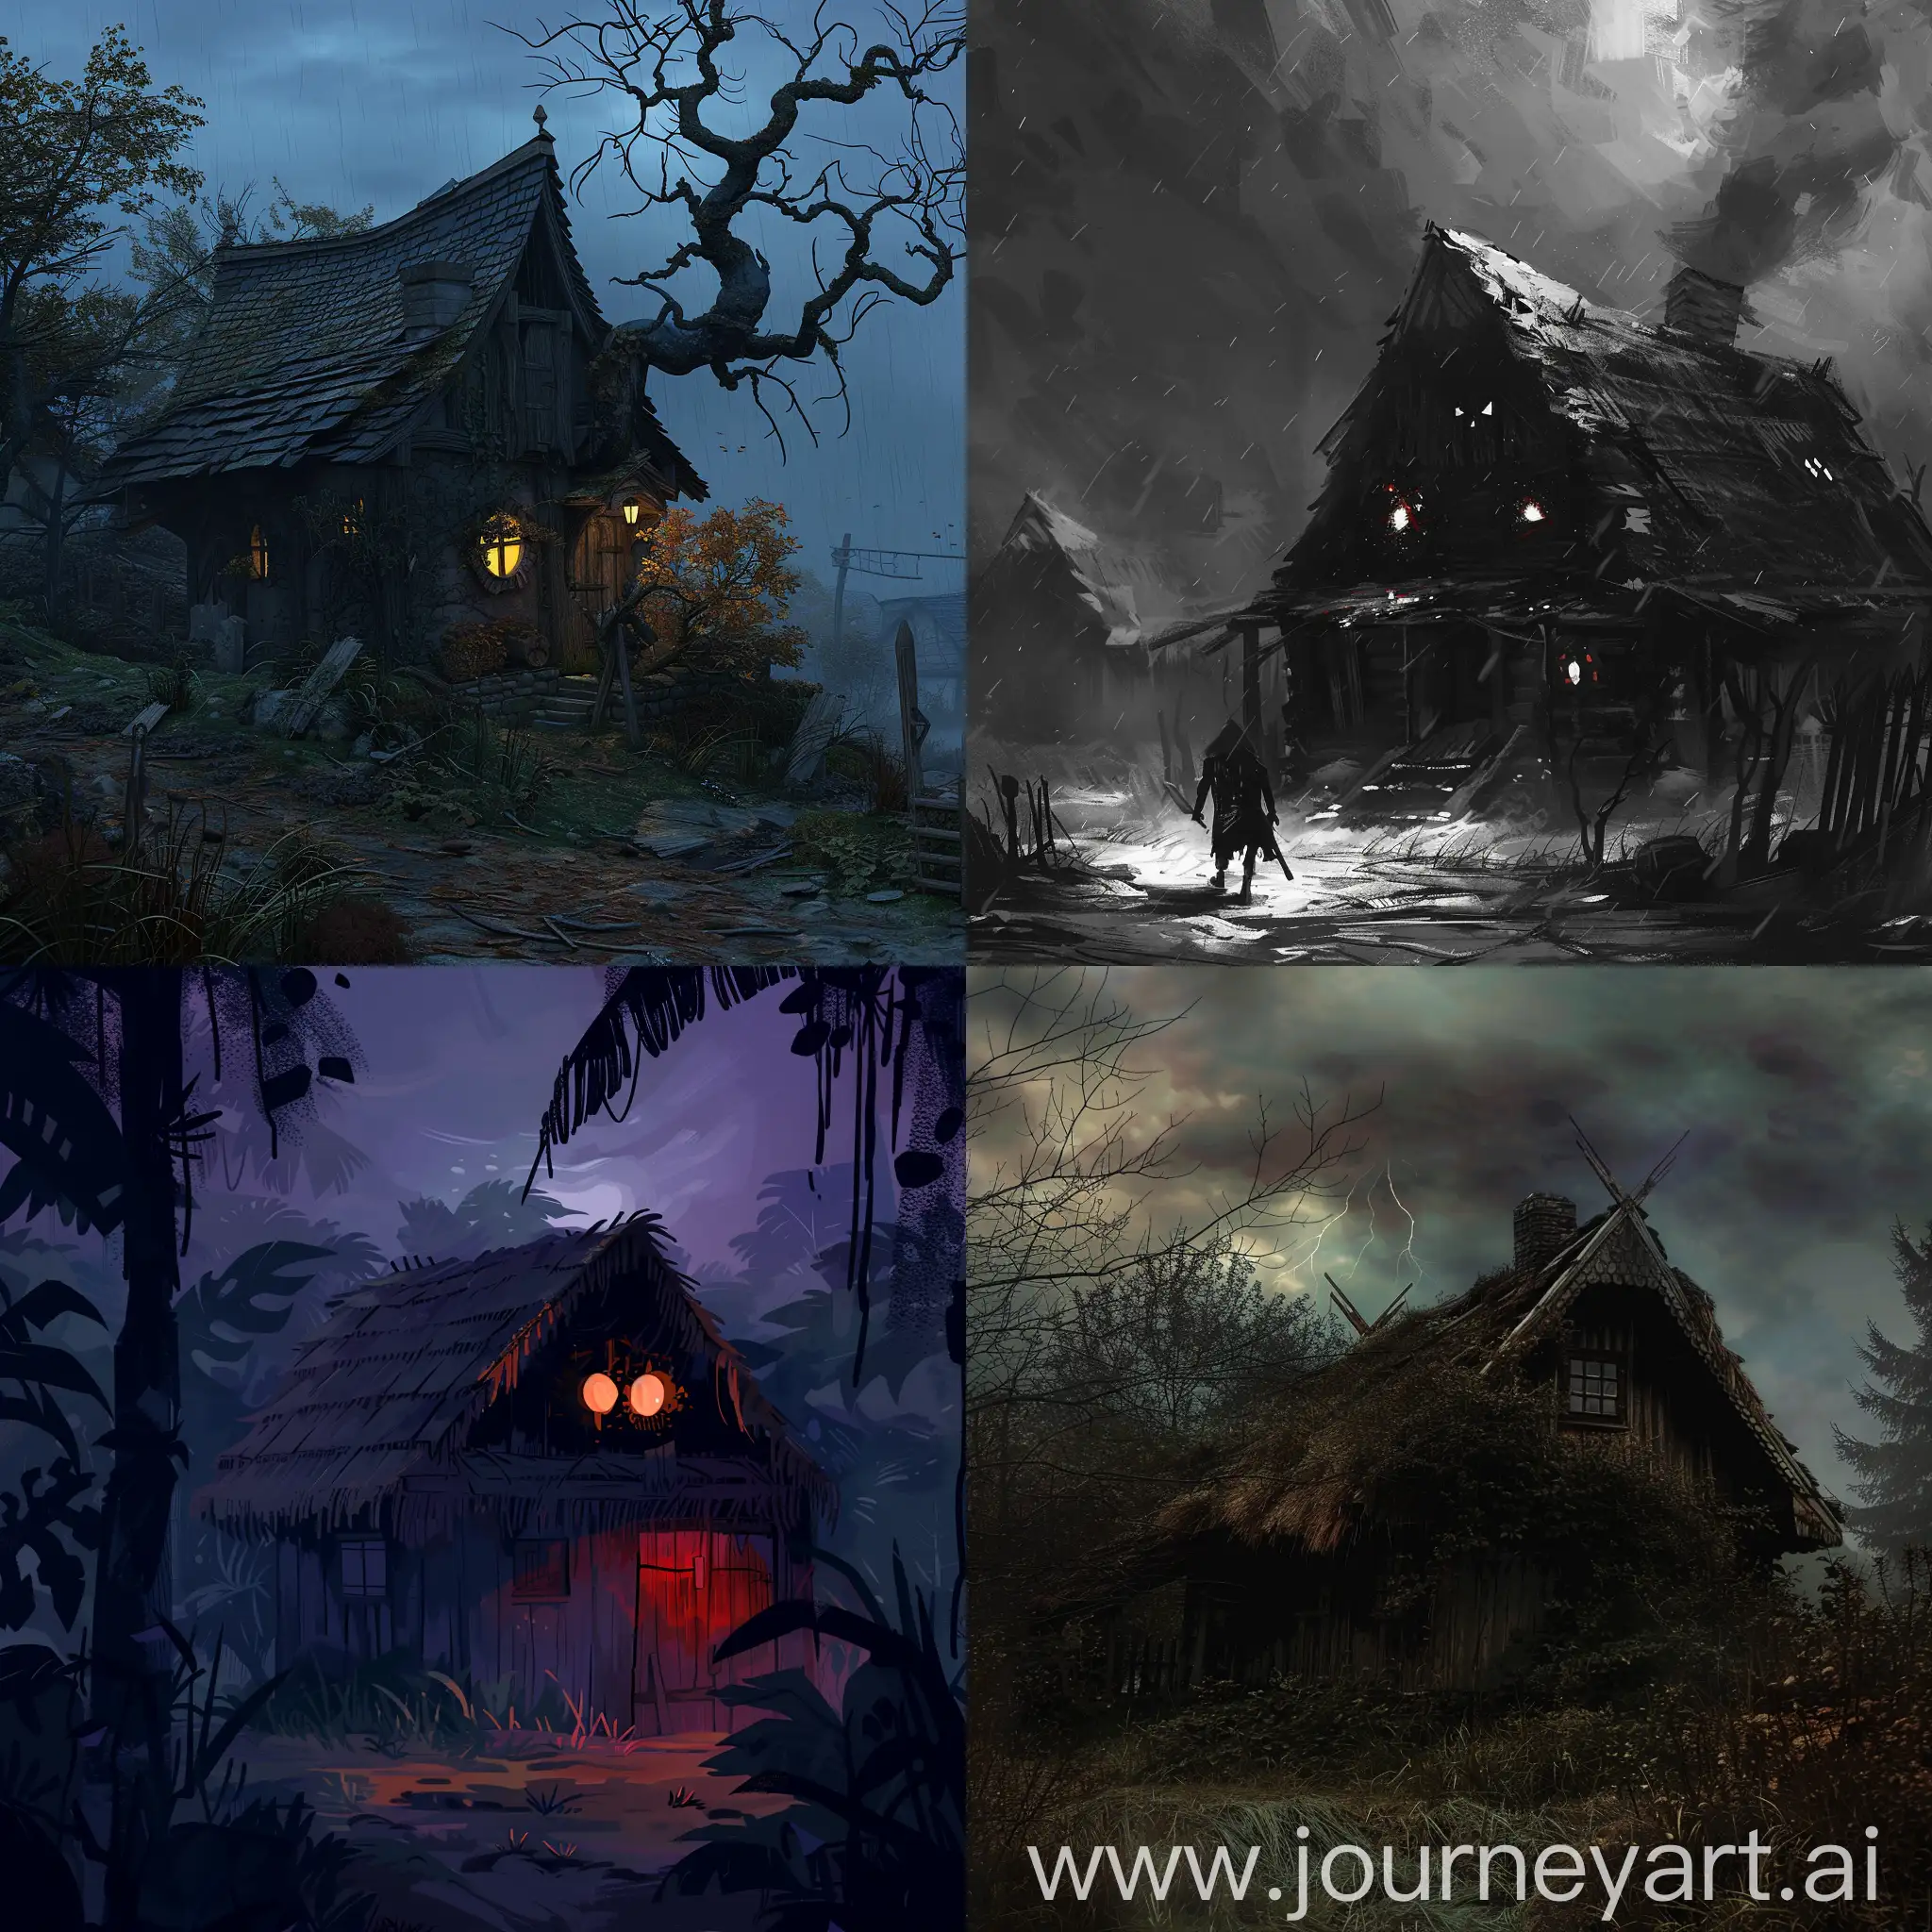 Eerie-Hut-Amidst-the-Village-Mysterious-and-Haunting-Scene